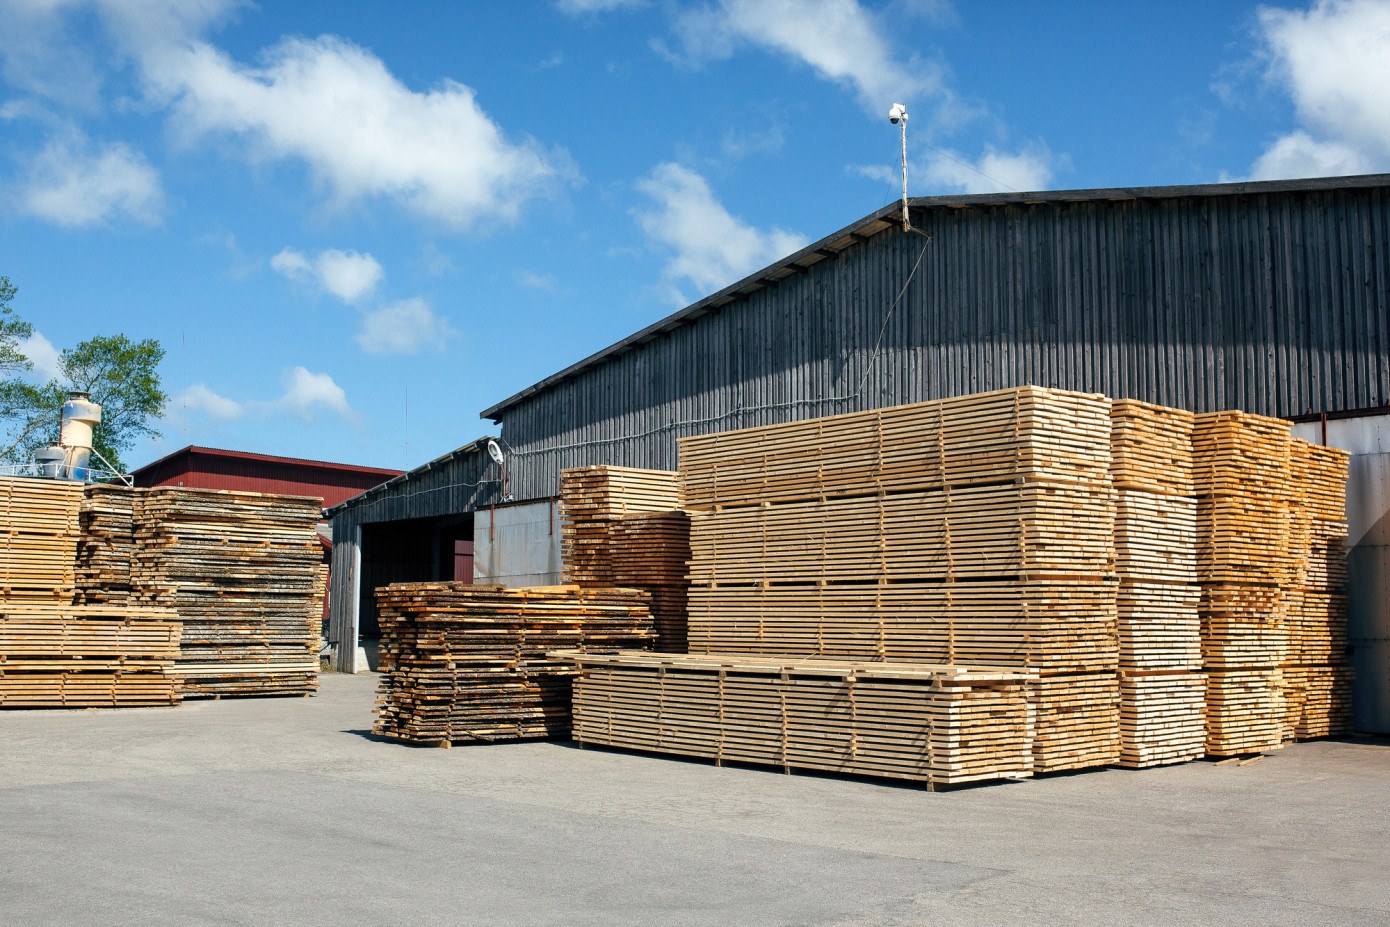 In first quarter, Russia"s lumber production increases by 1.6%